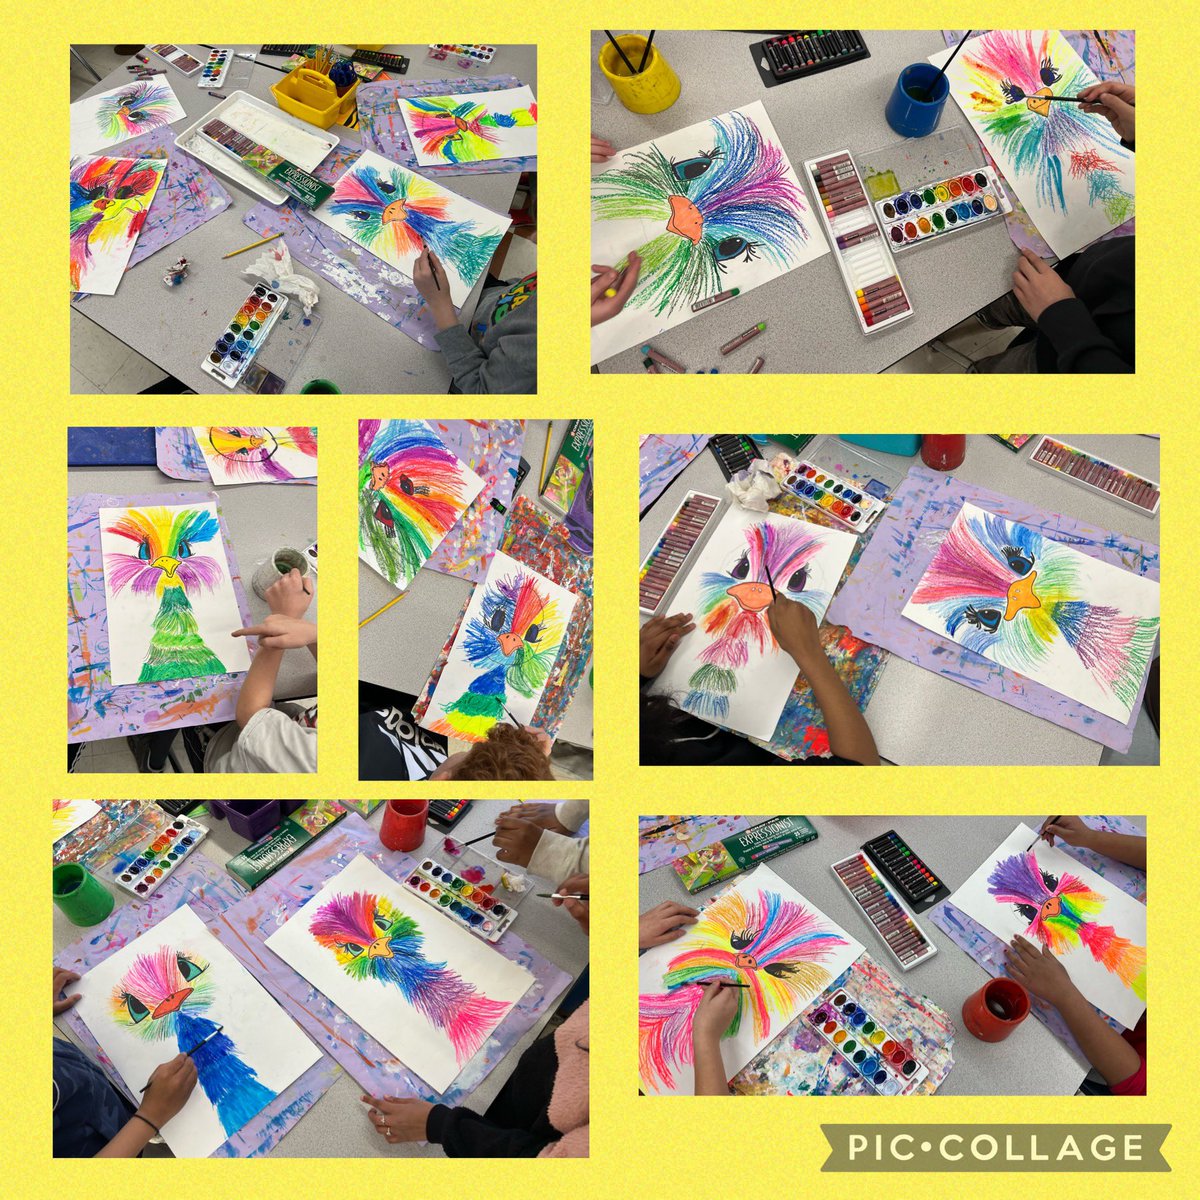 Using the color wheel as inspiration and learning about intermediate colors, 5th grade artists are creating kooky & colorful emus using oil pastels and watercolor paint 😍🌈🎨 @CMSmtolive @NicoleMusarra @ashleylopez210